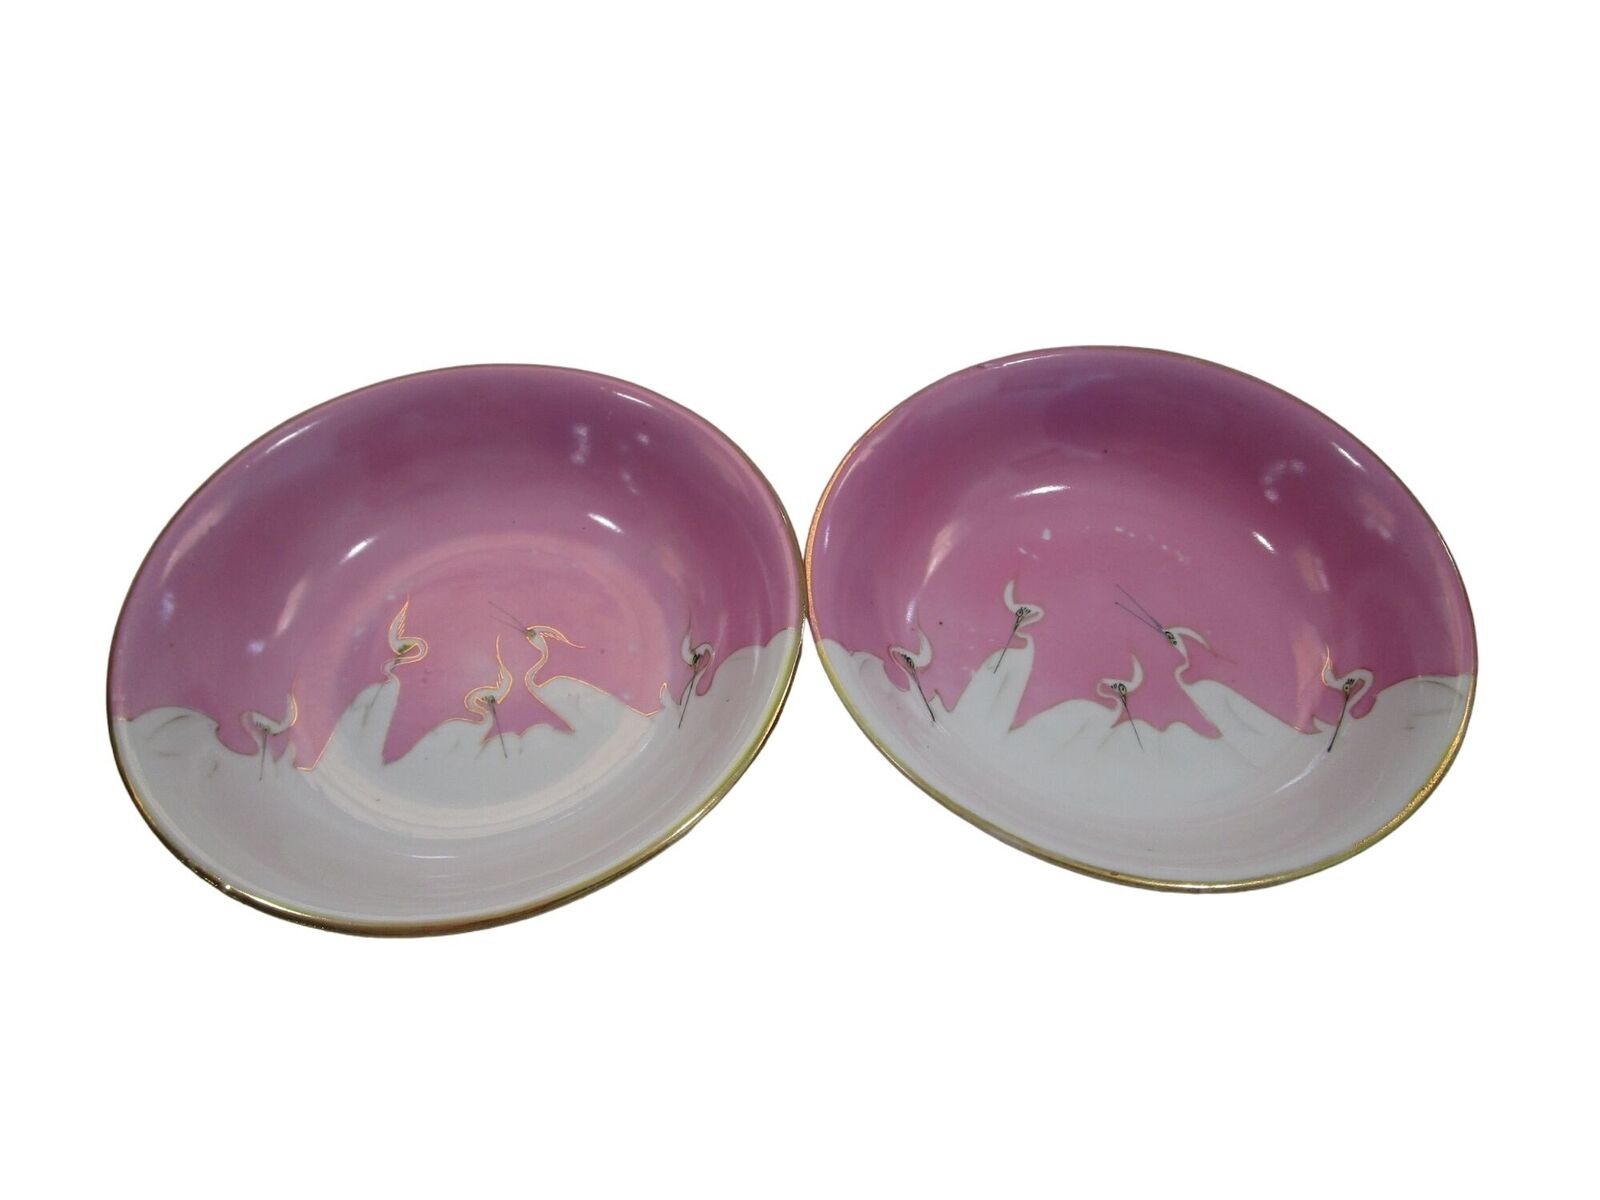 Five Lucky Cranes on Pink Small Porcelain Bowls Japan Post 1922 Flawed A Pair